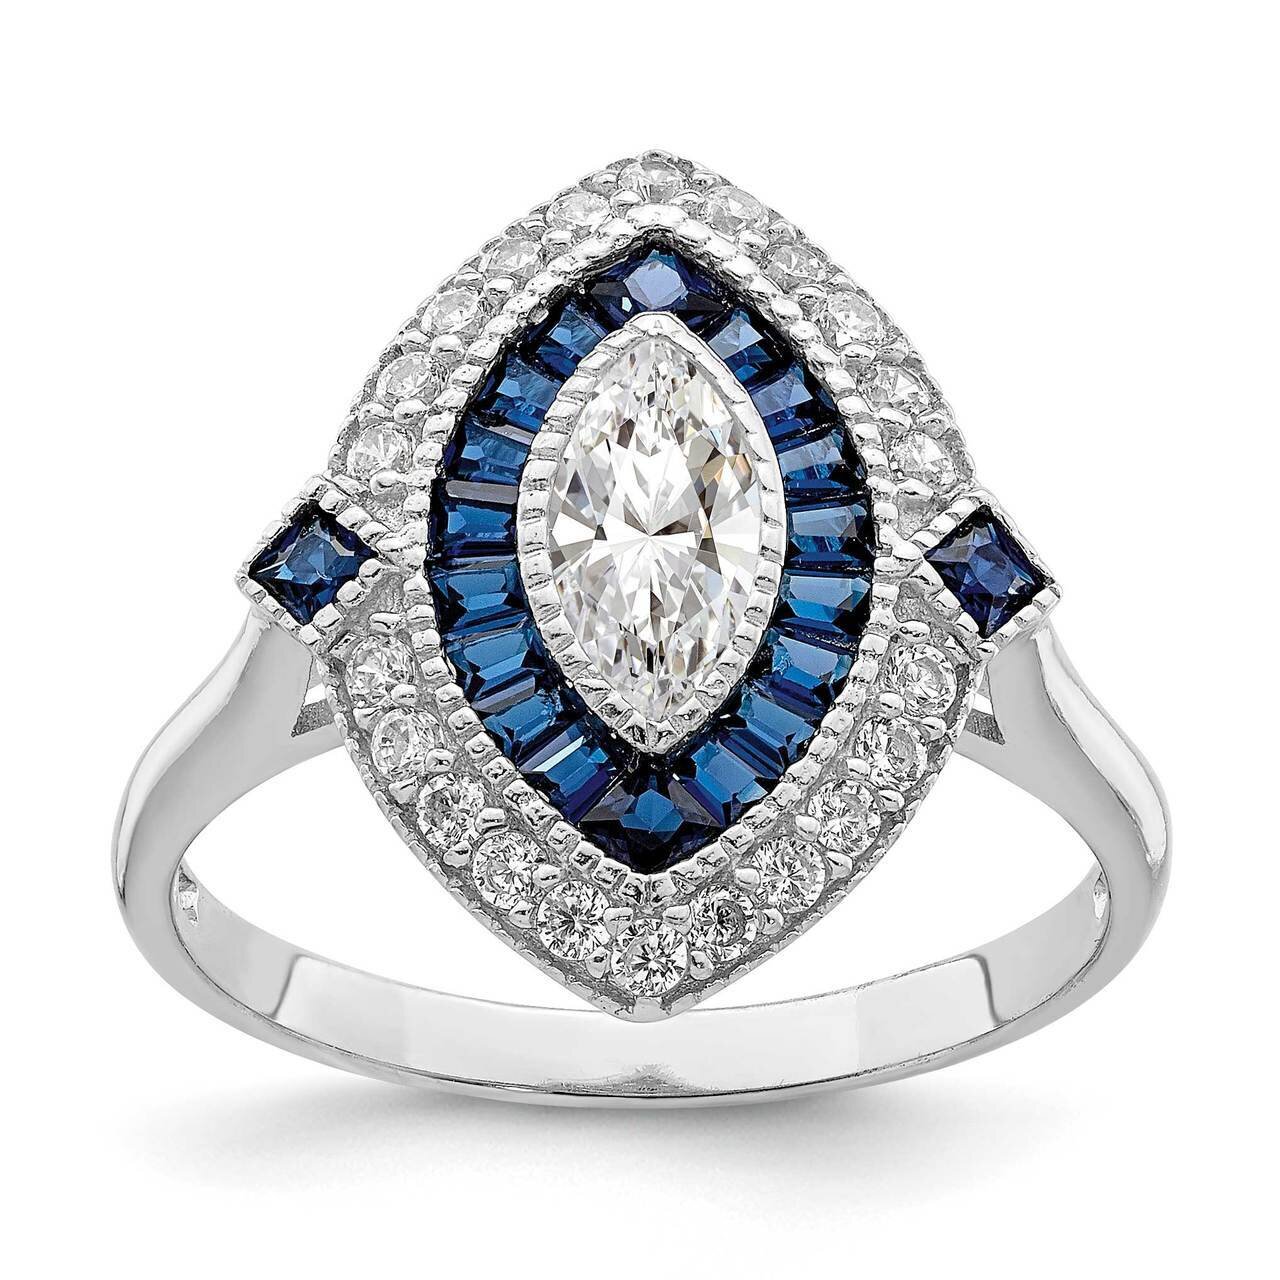 Synthetic Blue Spinel Ring Sterling Silver Rhodium-plated CZ Diamond QR6858